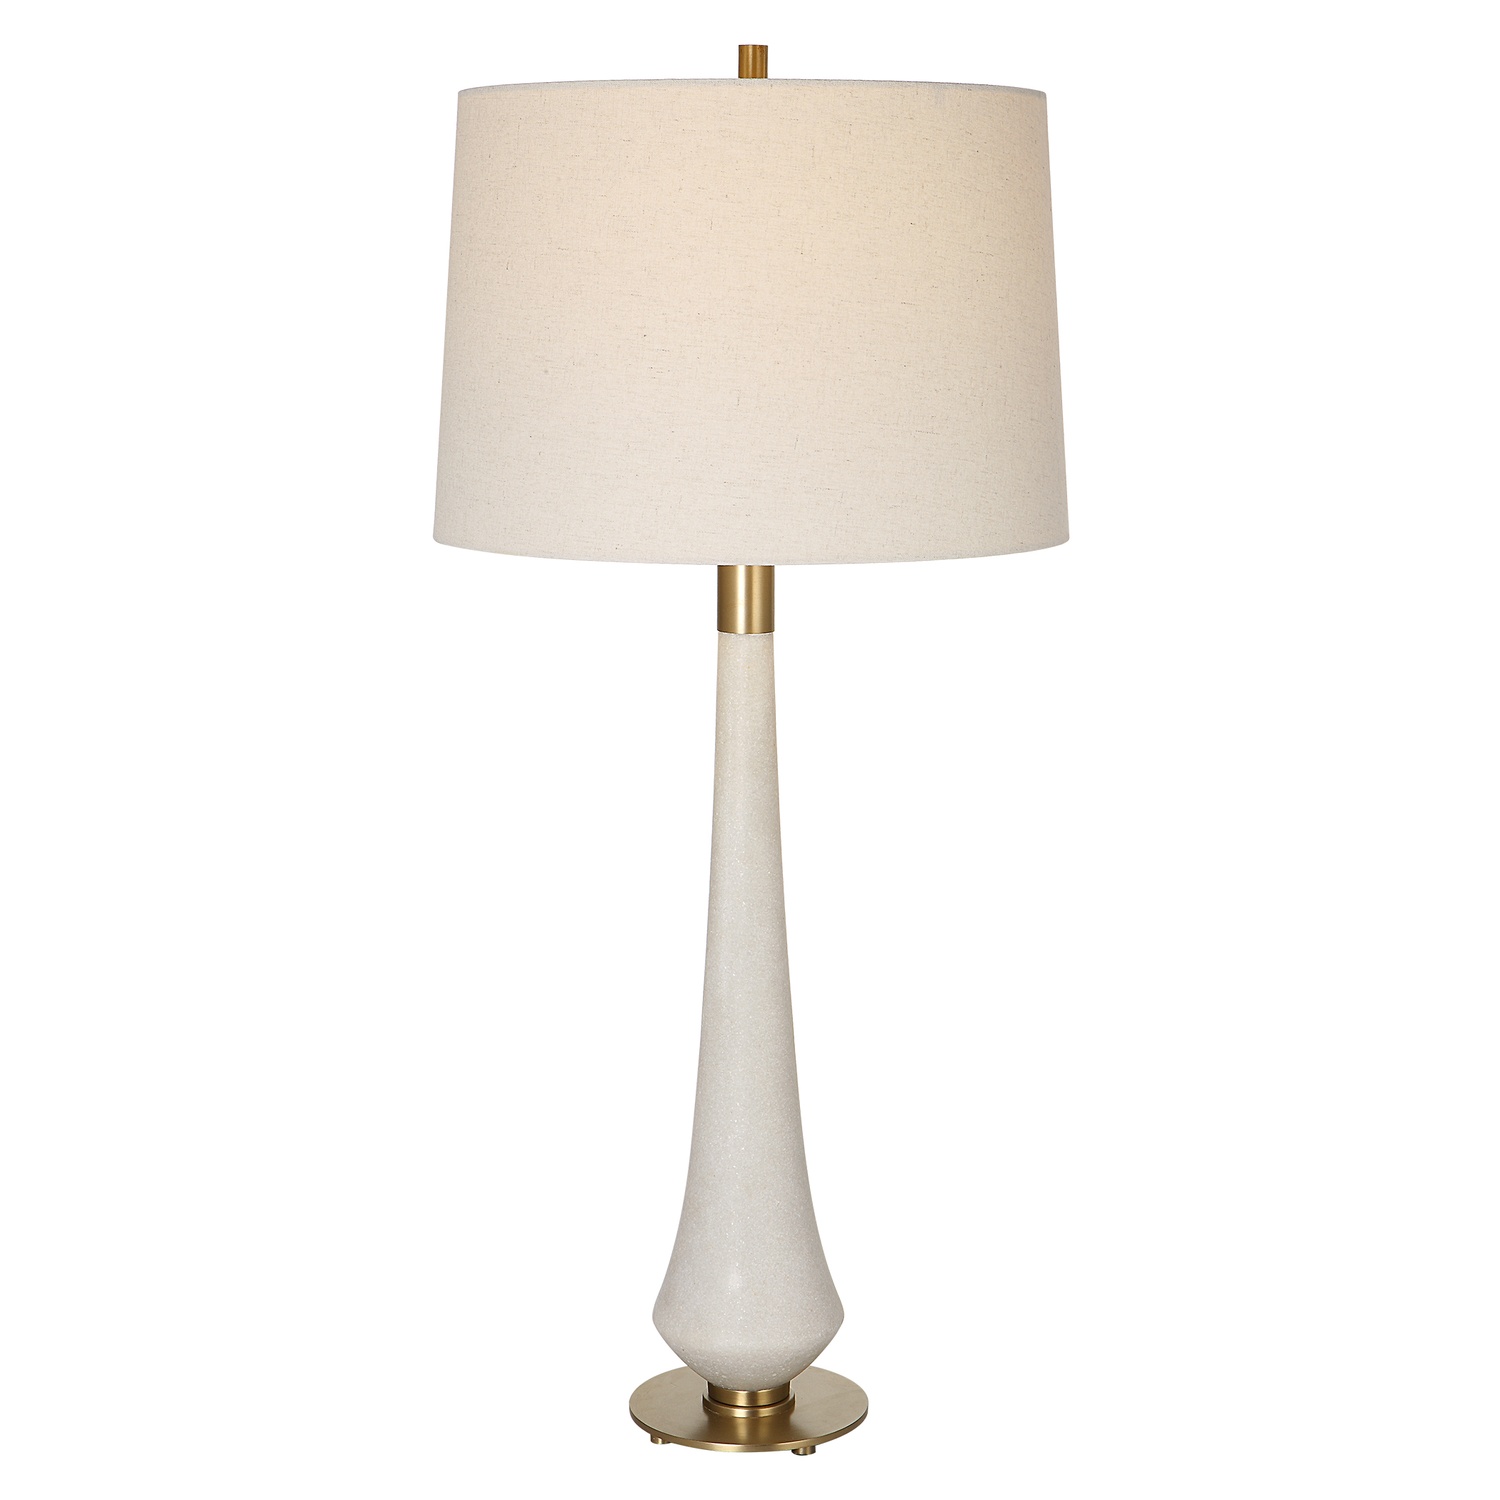 Marille-Ivory Stone Table Lamp